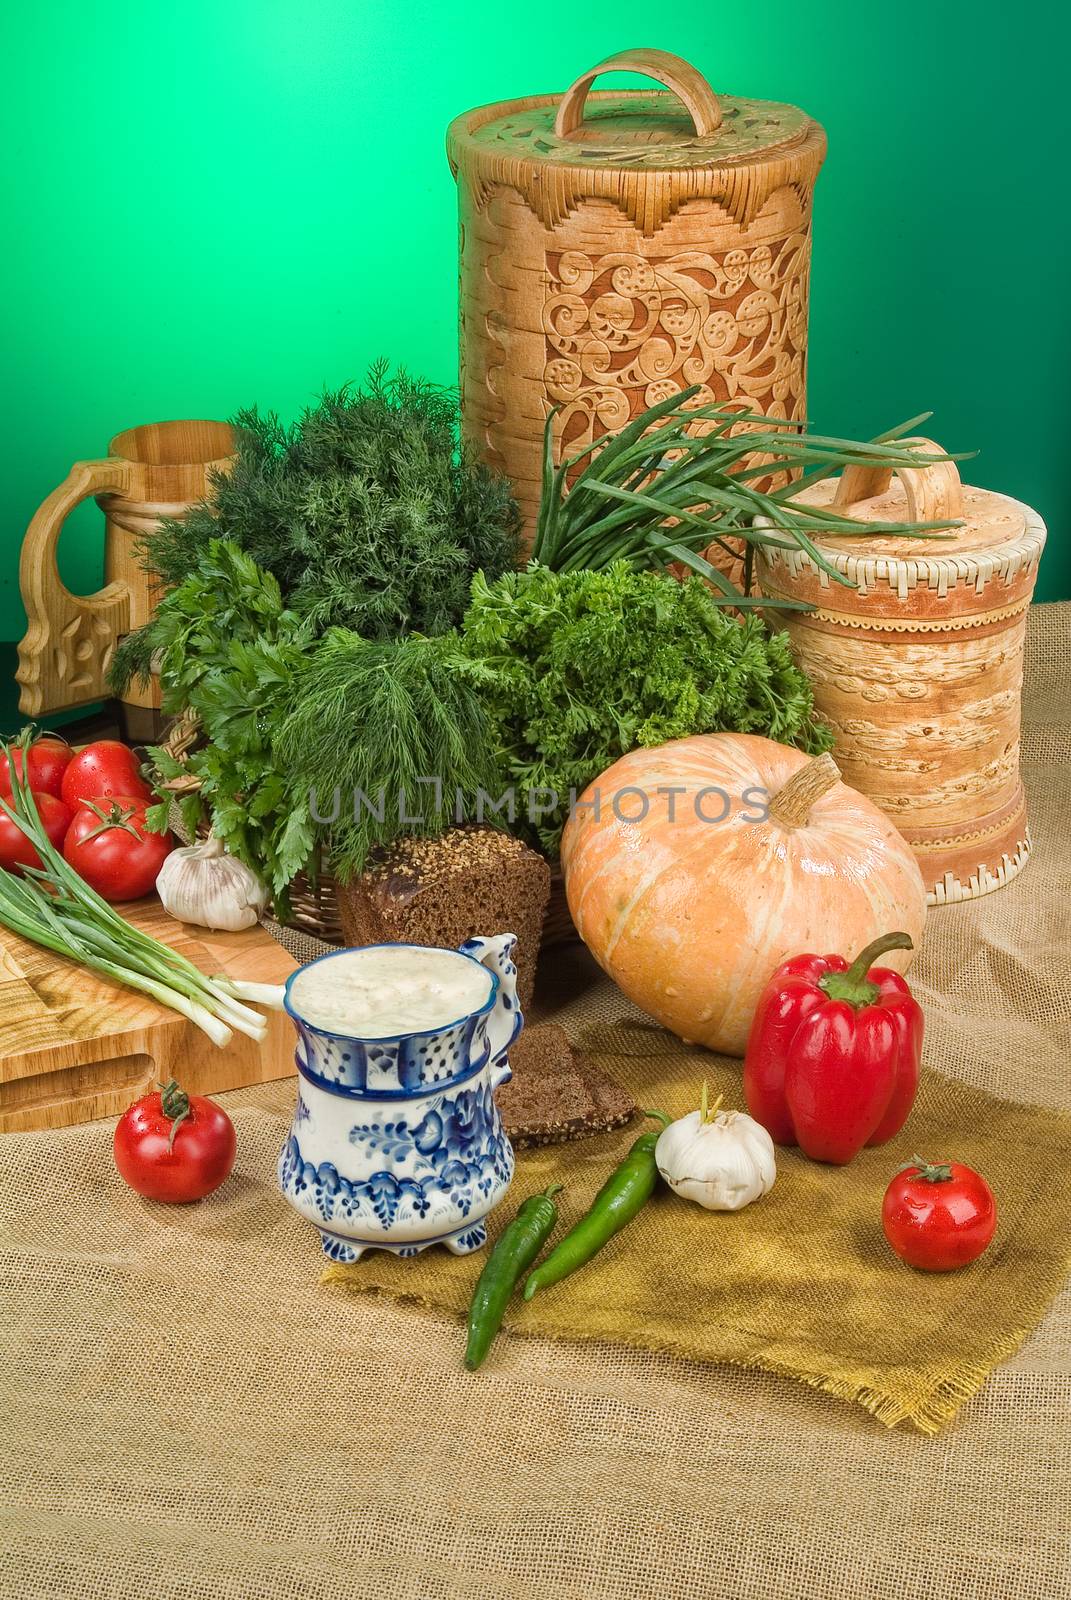 Vegetables, greenery and pumpkin on a studio background